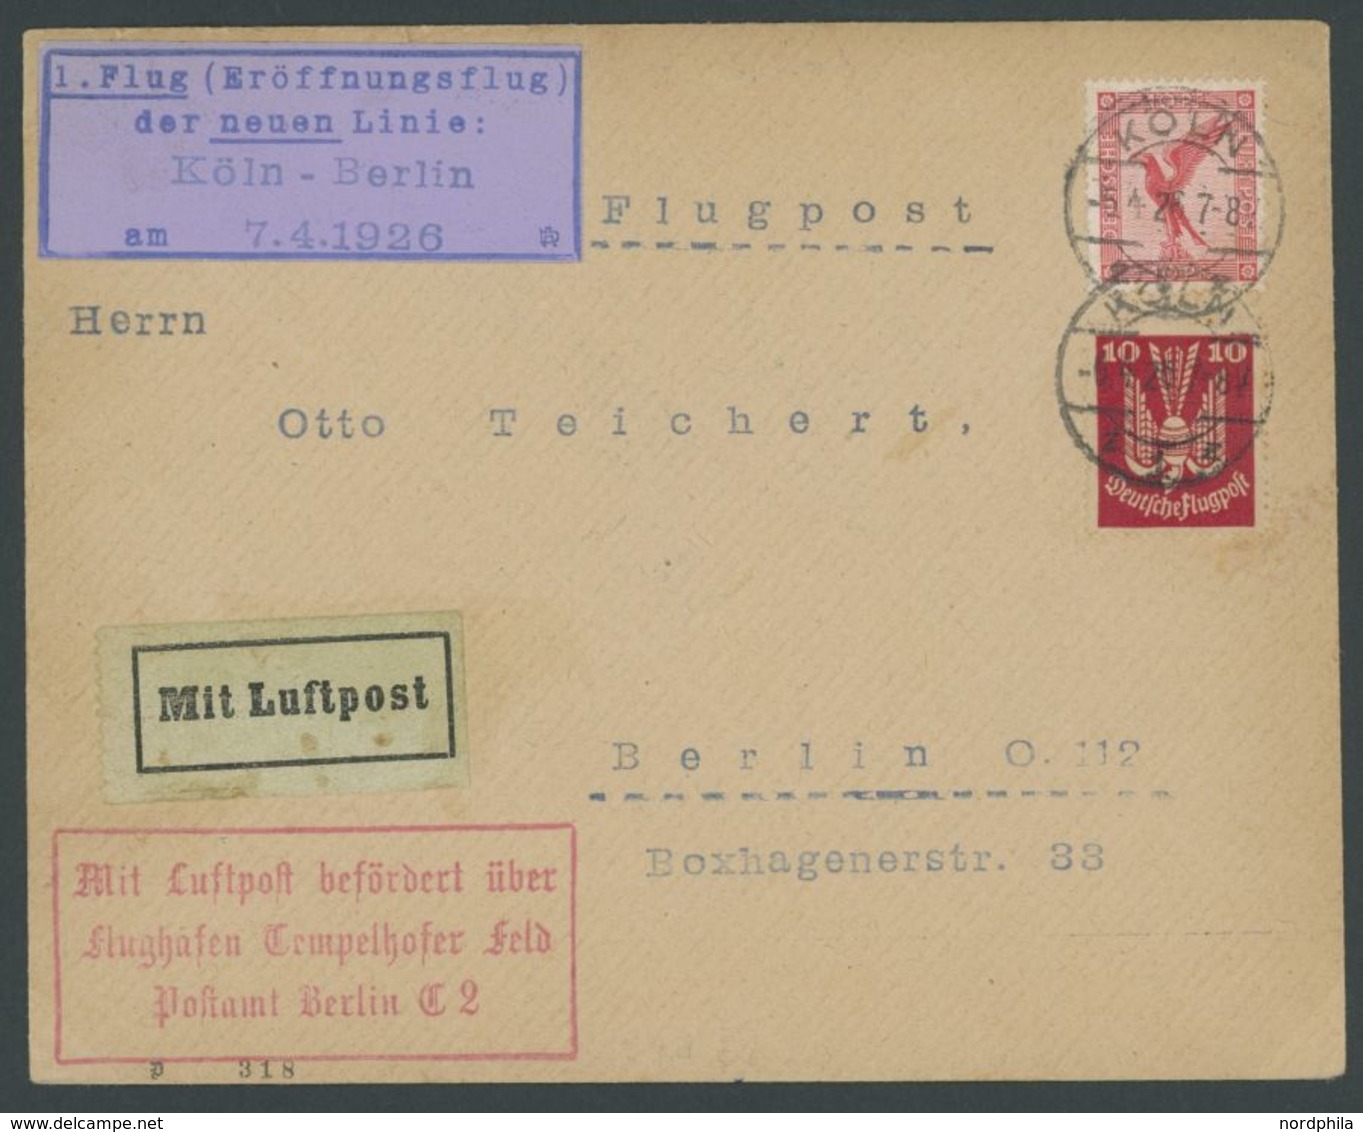 7.4.1926, Köln-Berlin, Prachtbrief -> Automatically Generated Translation: 7.4.1926, "Cologne Berlin", Superb Cover - Airplanes